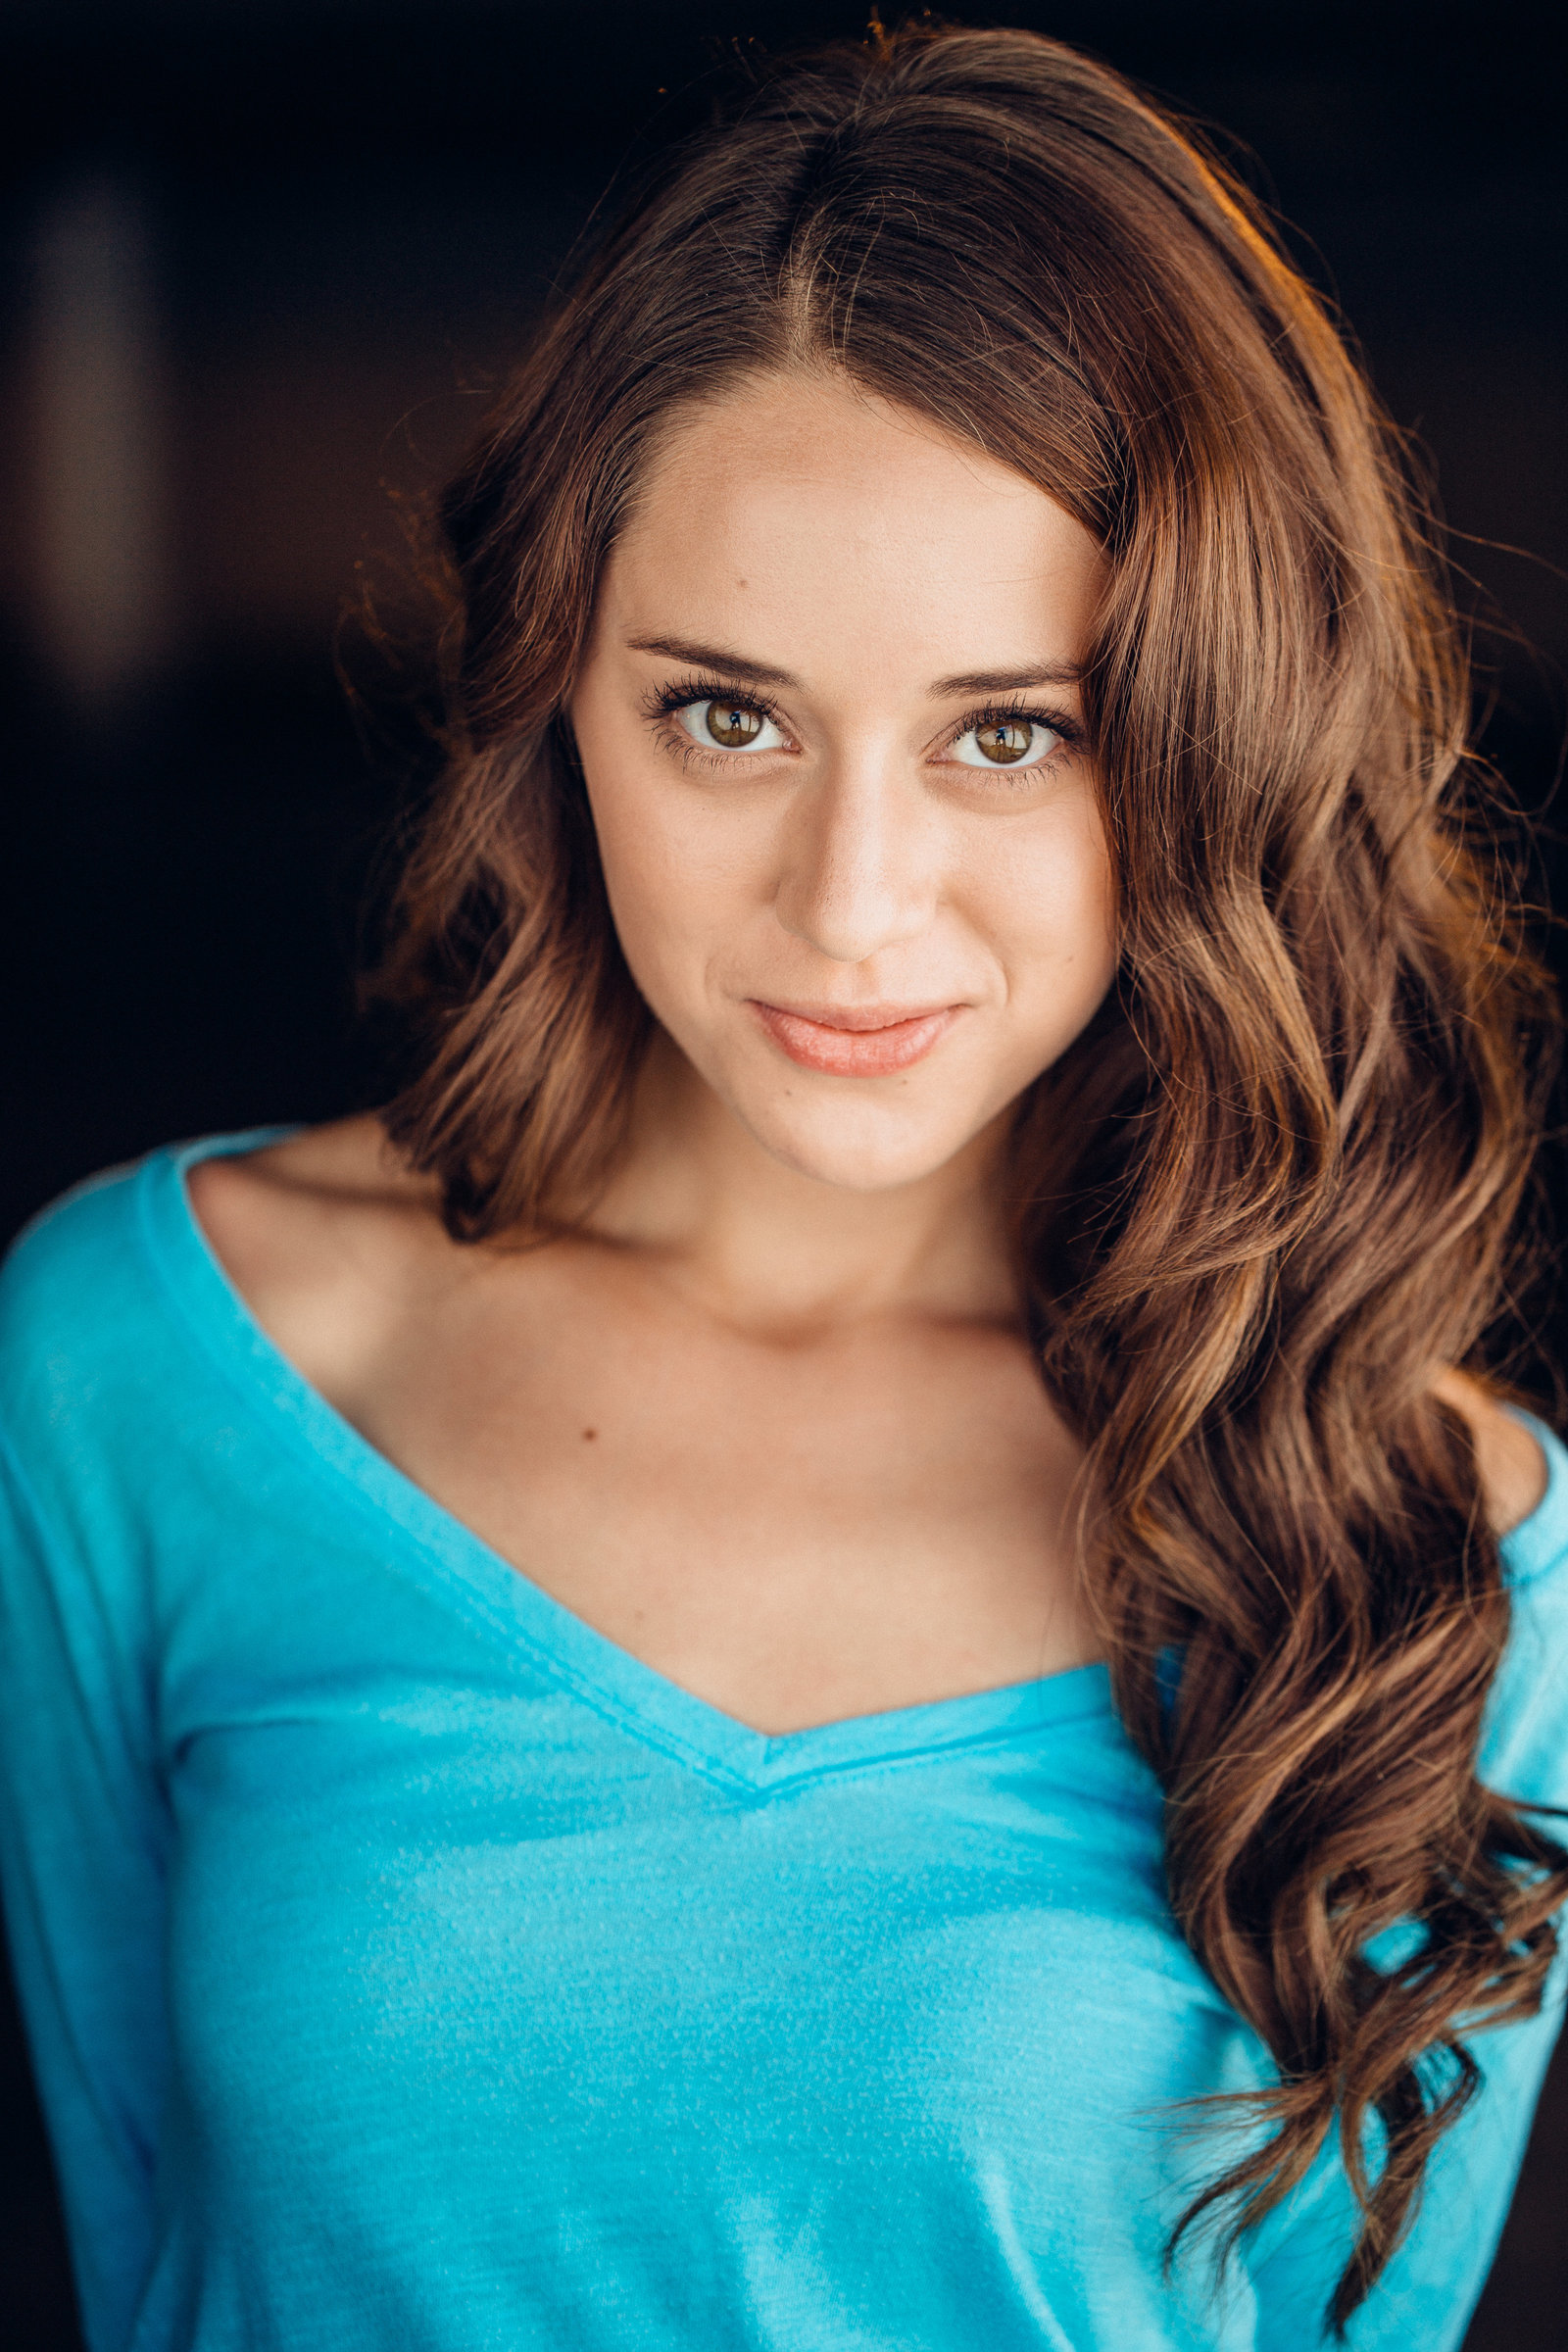 Headshot Photo Of Young Woman In Light Blue Off-Shoulder Blouse